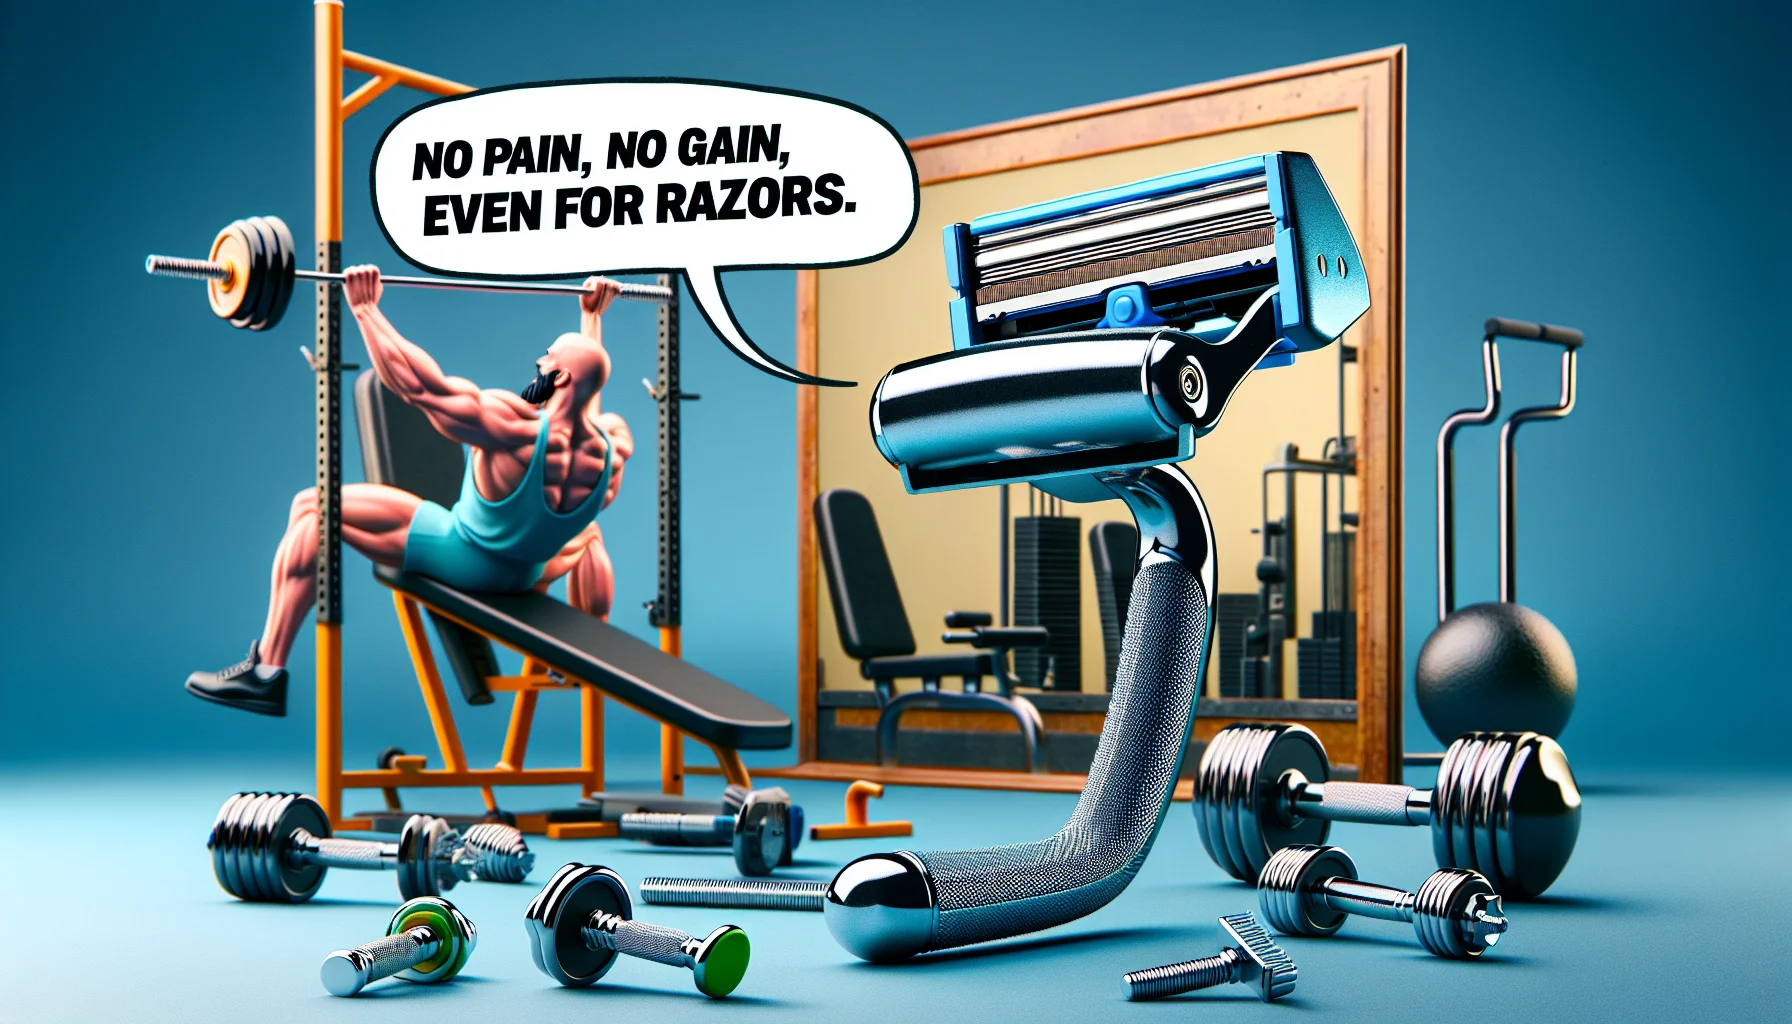 Create a realistic image that presents a scene of a precision shaving razor compared to a fitness regime. The shaving razor should be shown as though it's embarking on an intense workout, using gym equipment such as dumbbells and treadmills, to depict the precision and sharpness of the razor. Simultaneously, include a speech bubble showing a funny comment, something like 'No pain, No gain, even for razors.' This should create an enticing and humorous scenario inviting people to look after their fitness as well as personal grooming.